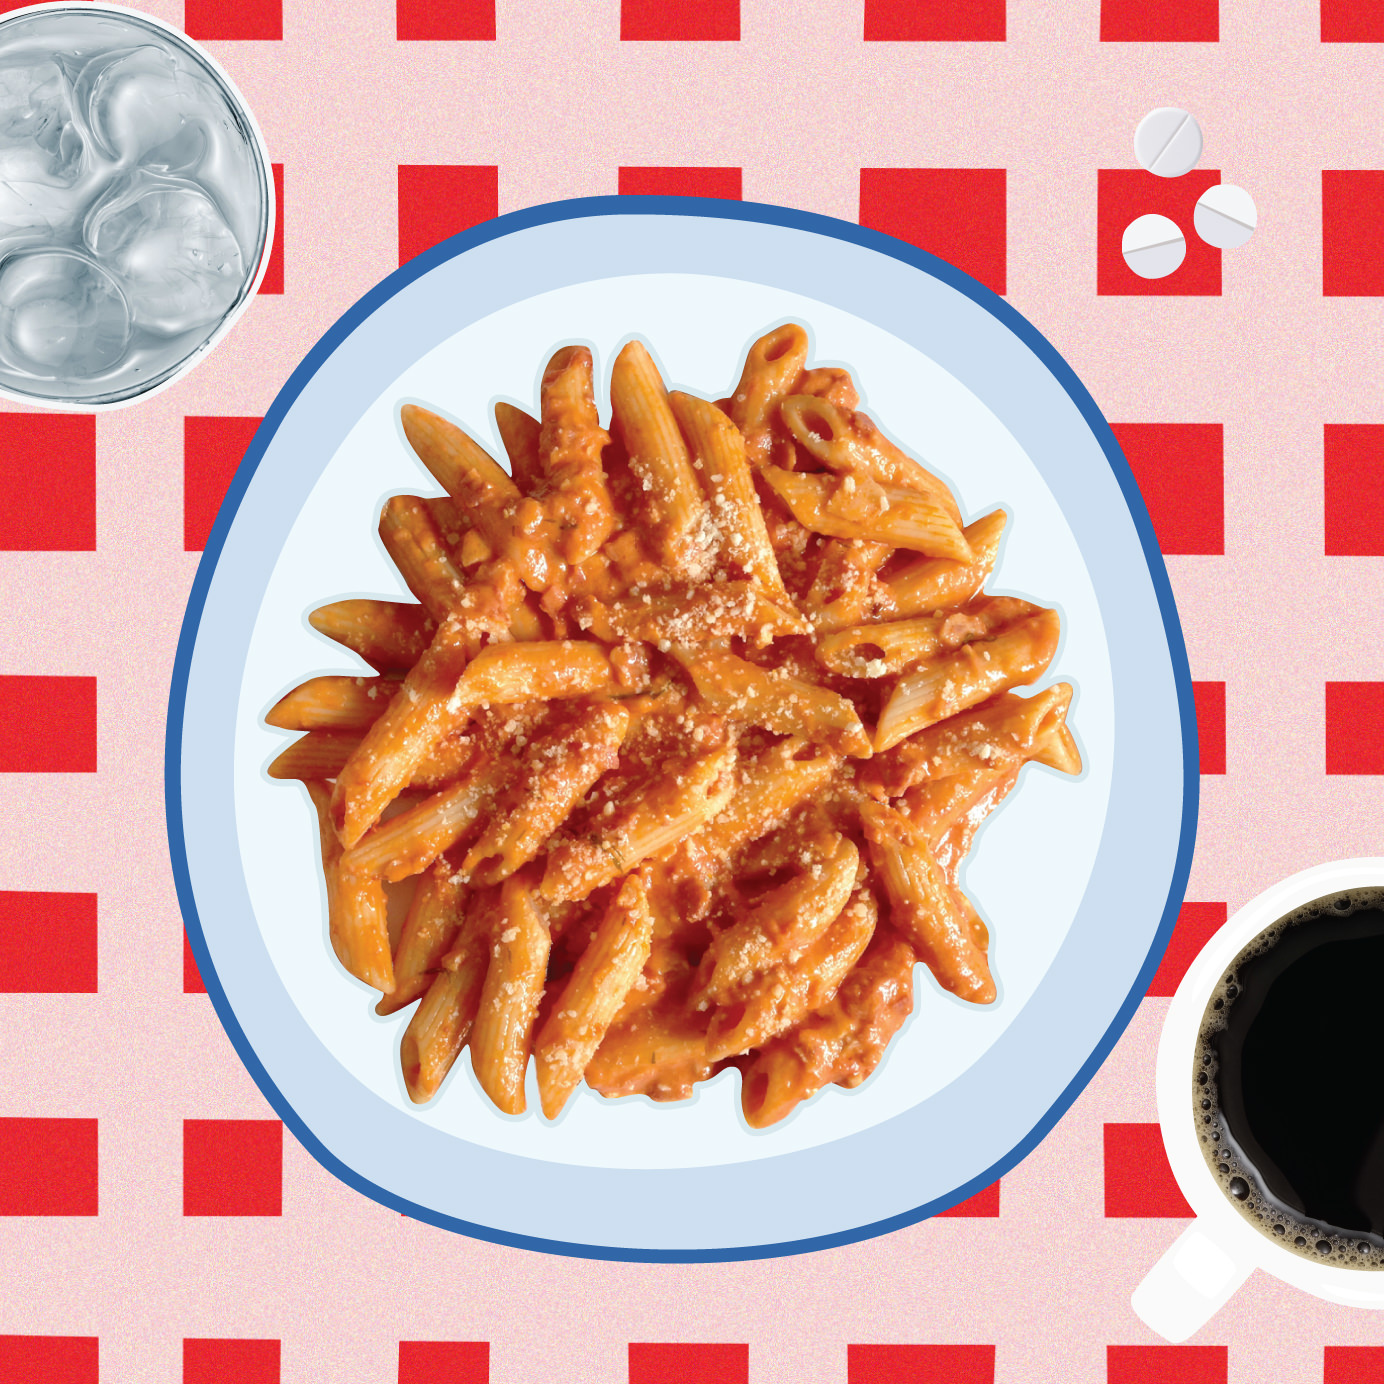 The Ultimate Hangover Cure Is an Iconic Italian-American Pasta